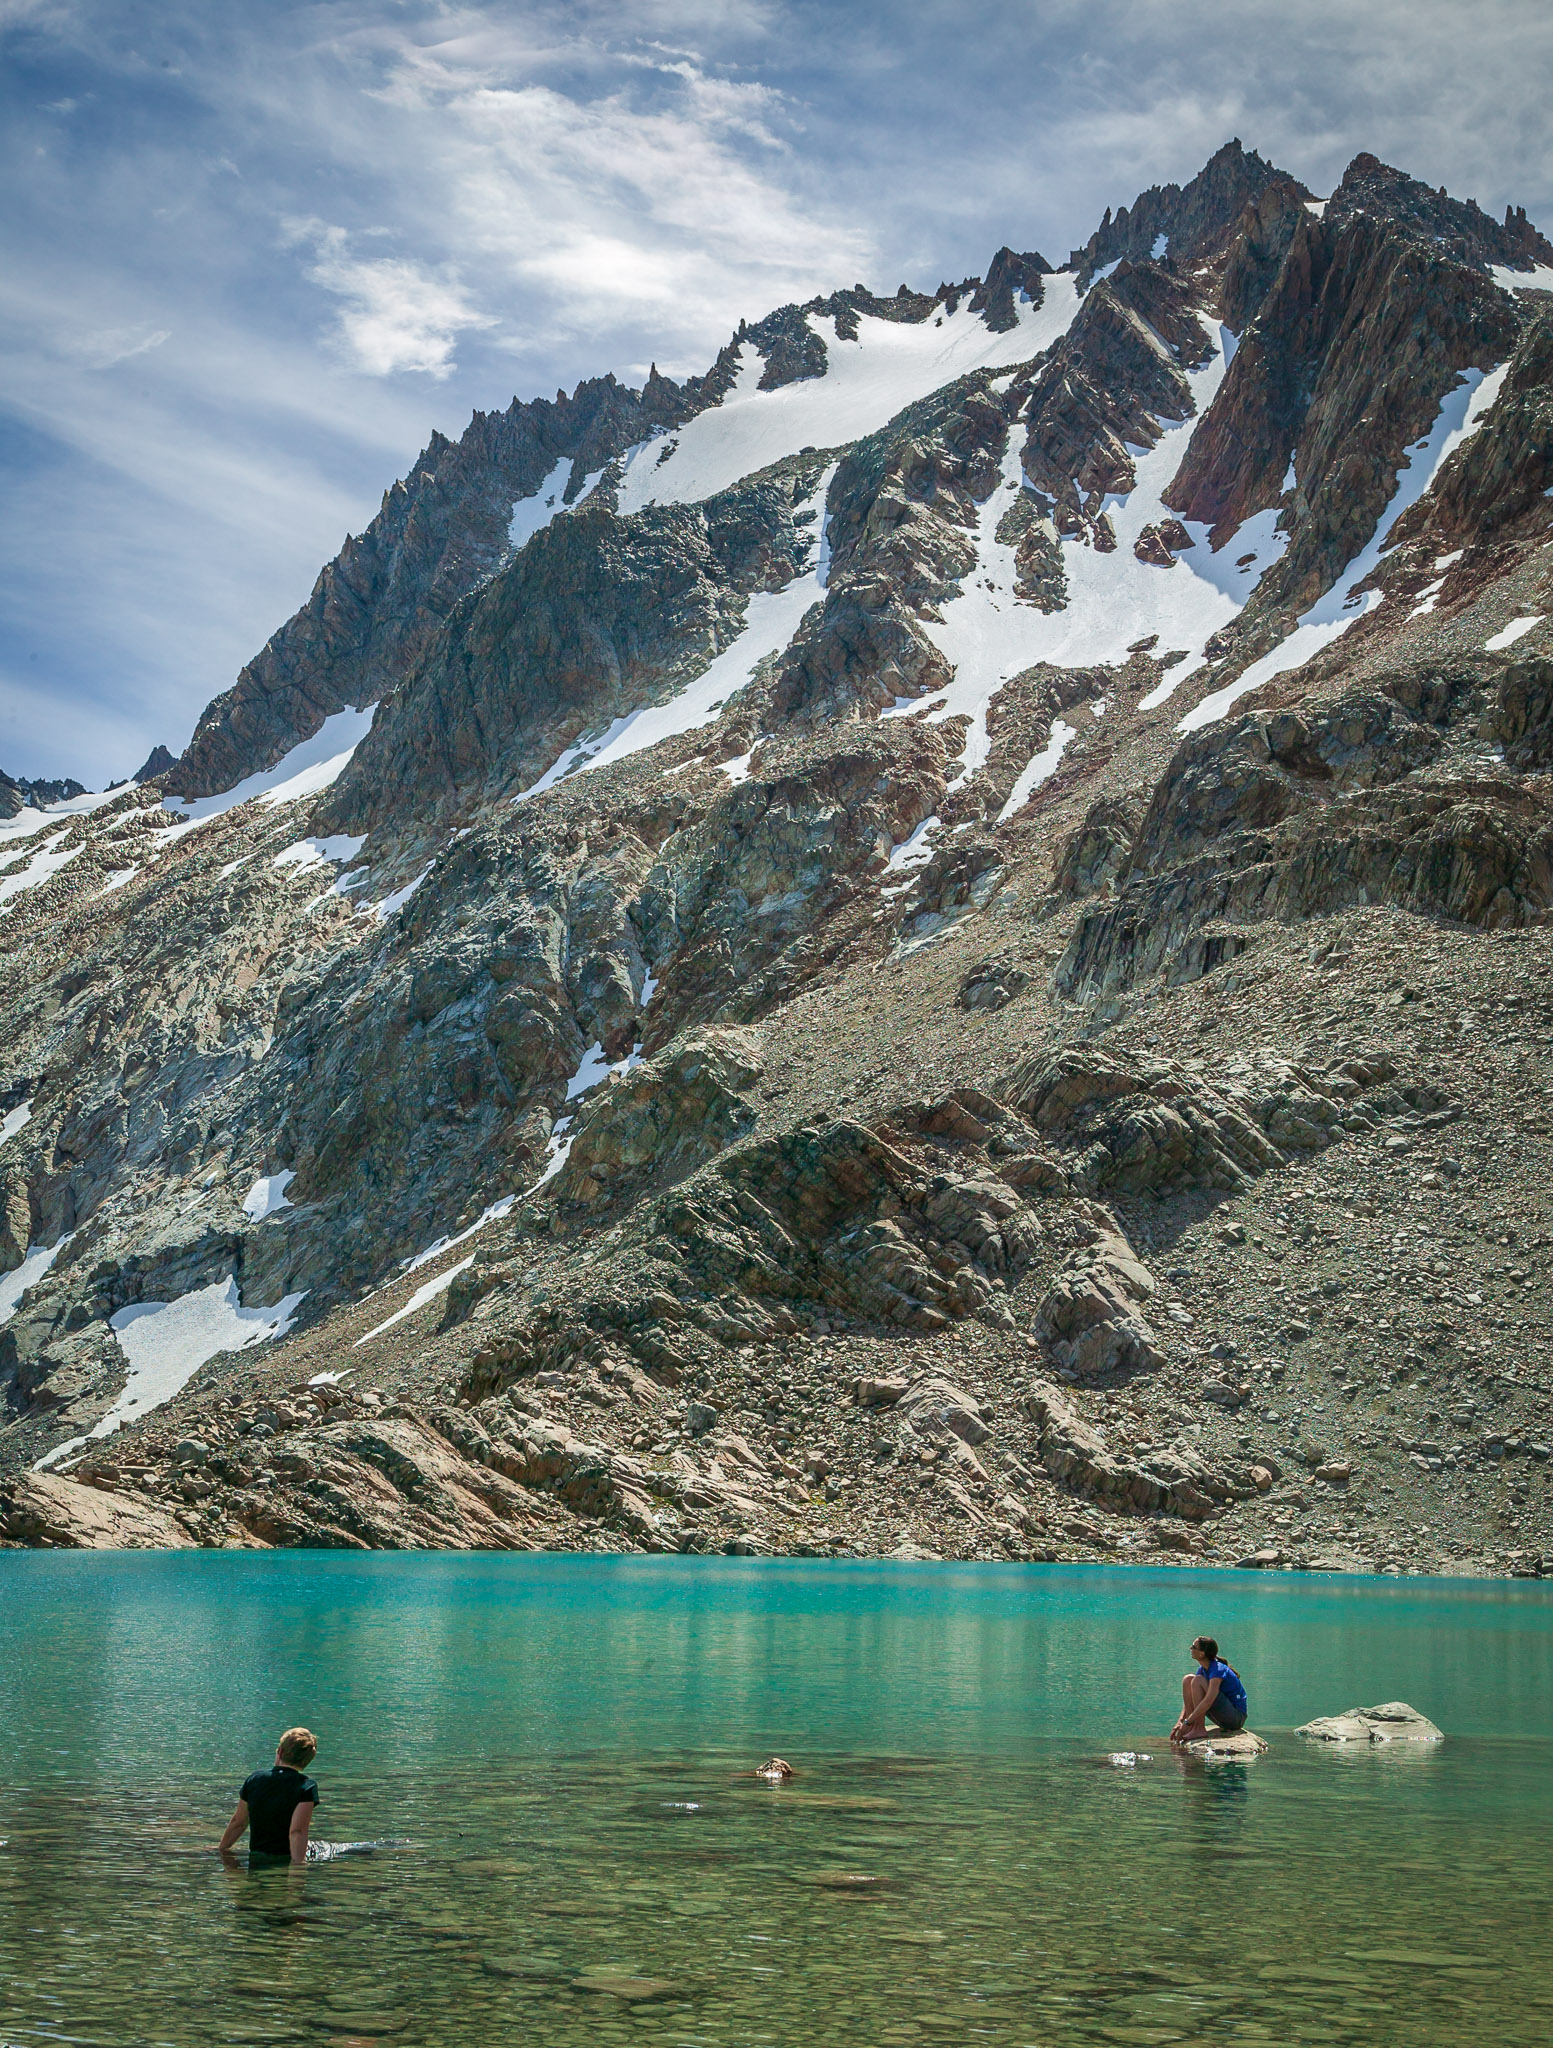 Cooling off in Laguna de los Tres on an 80+°F day